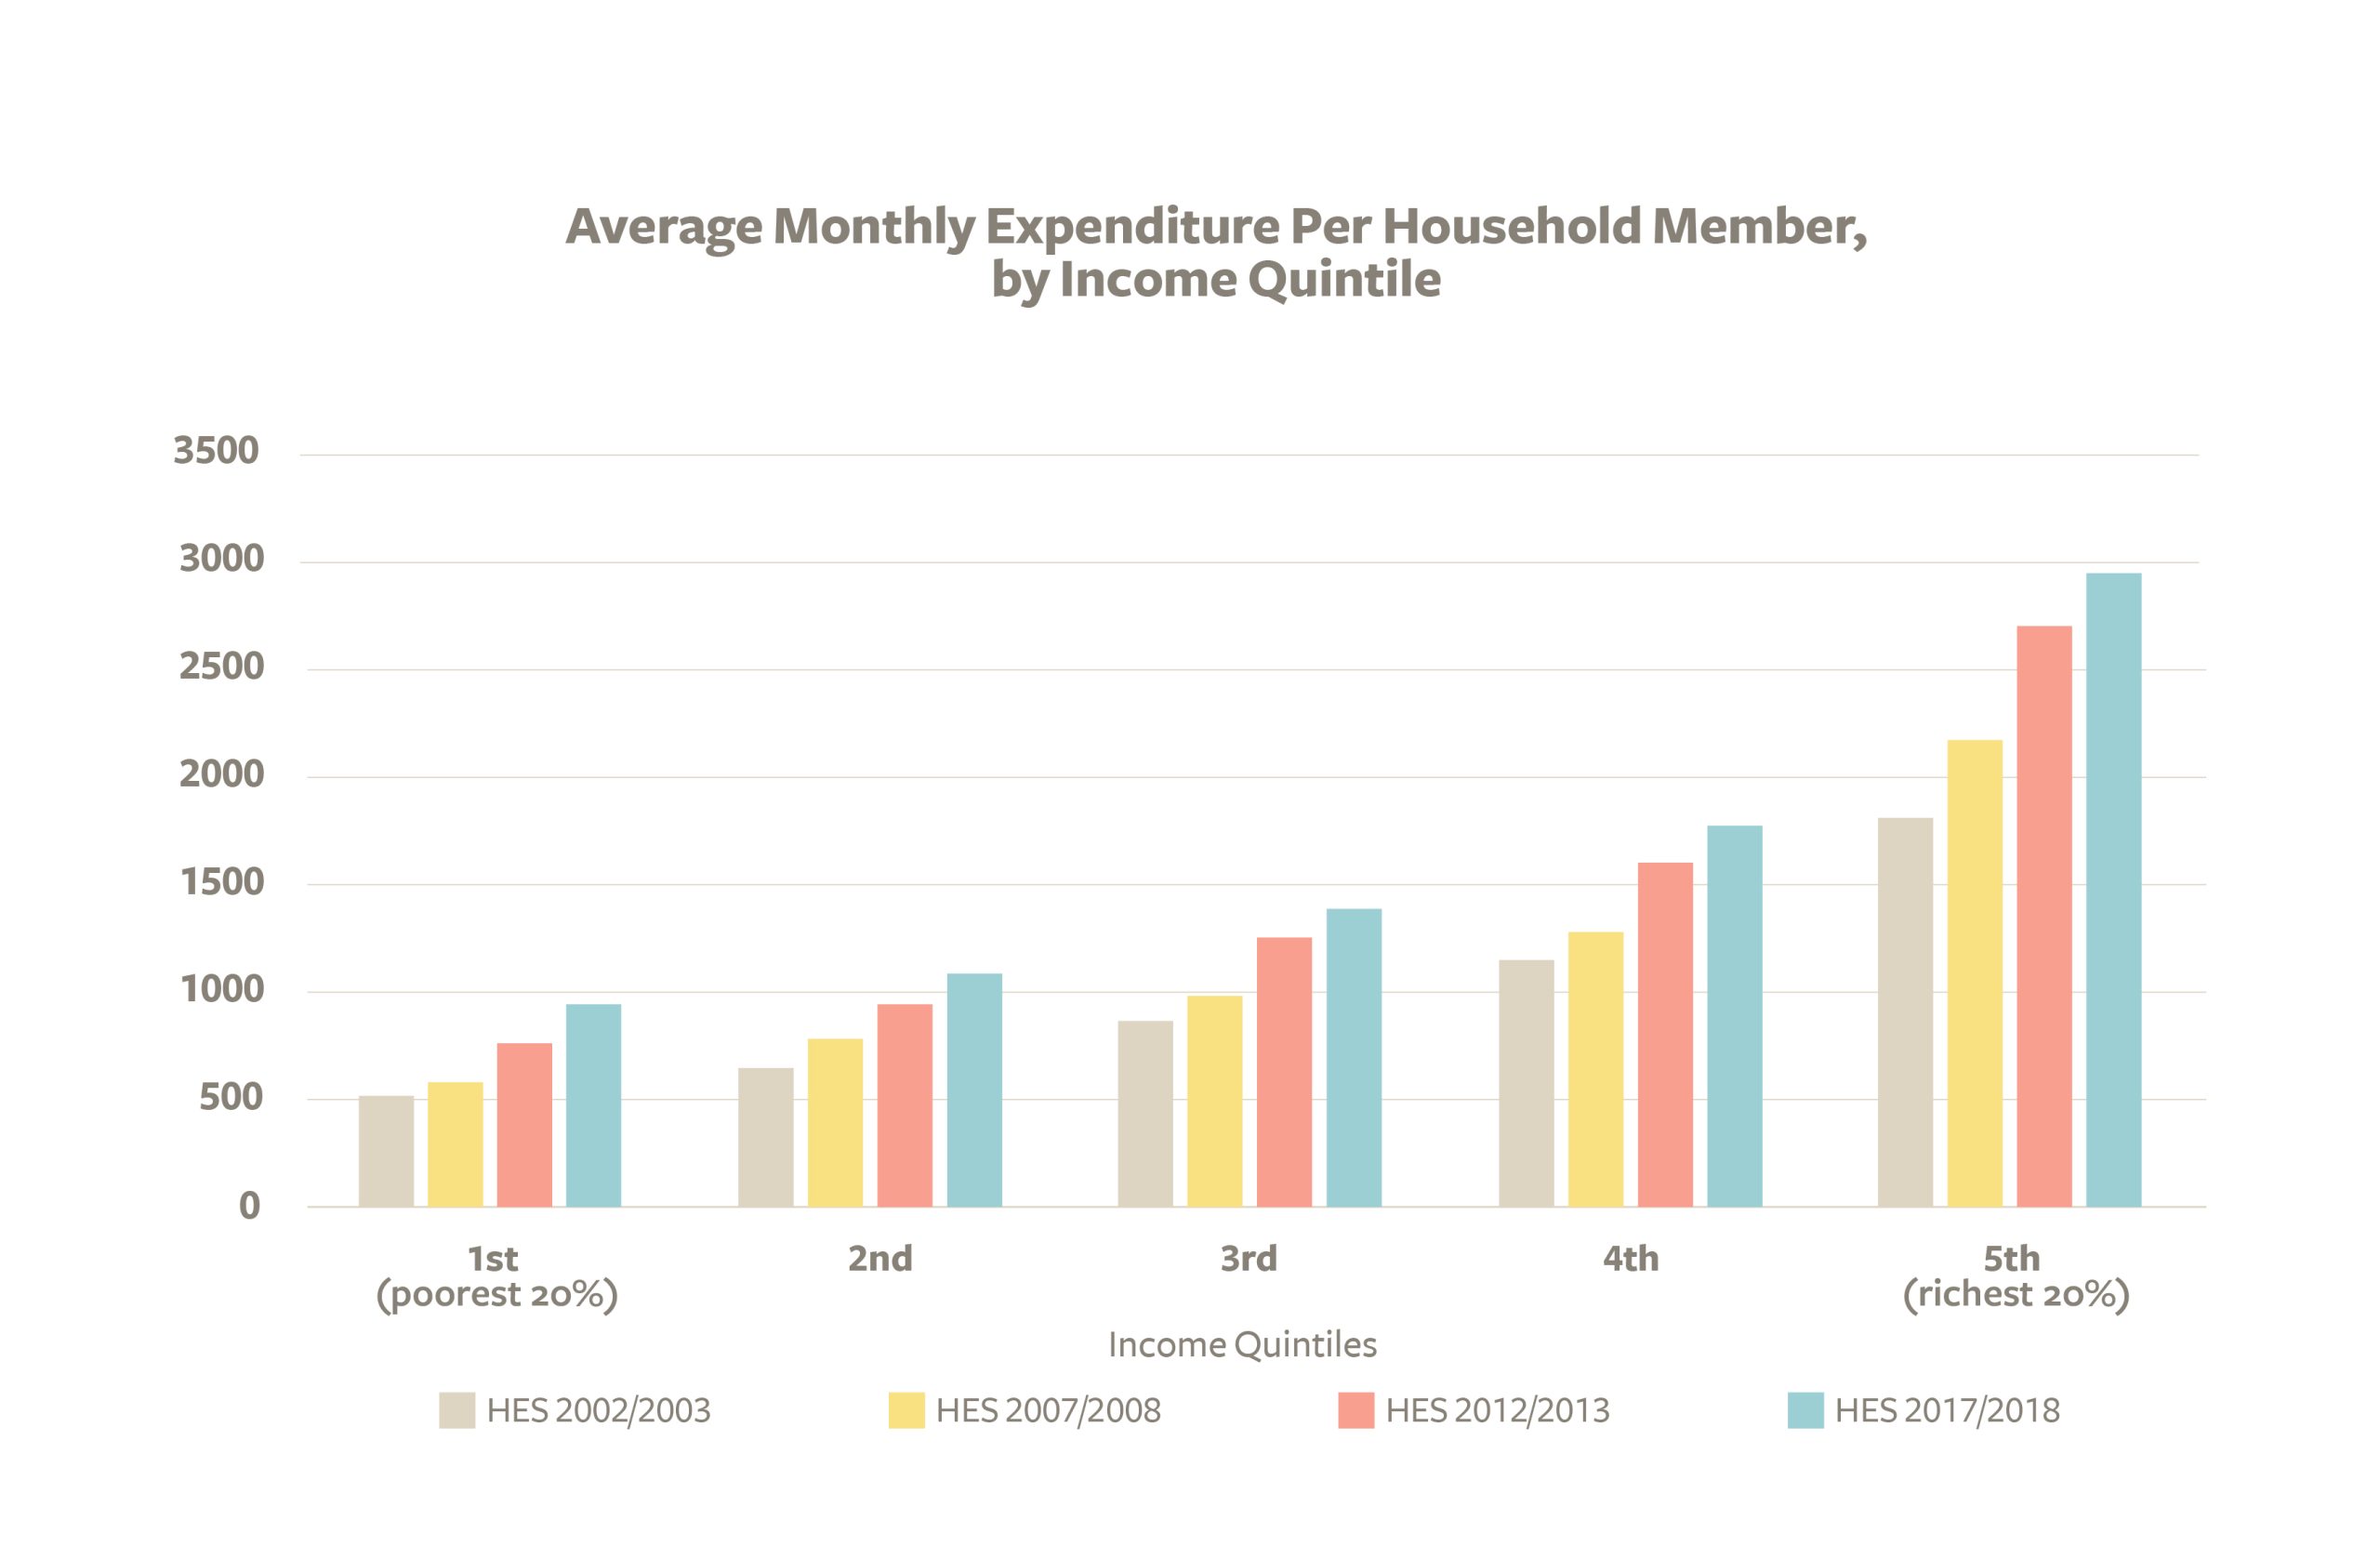 Figure 5: Average Monthly Expenditure Per Capita, by Income Quintile. Source: Household Expenditure Surveys, Singapore Department of Statistics, https://tablebuilder.singstat.gov.sg/table/CT/16450